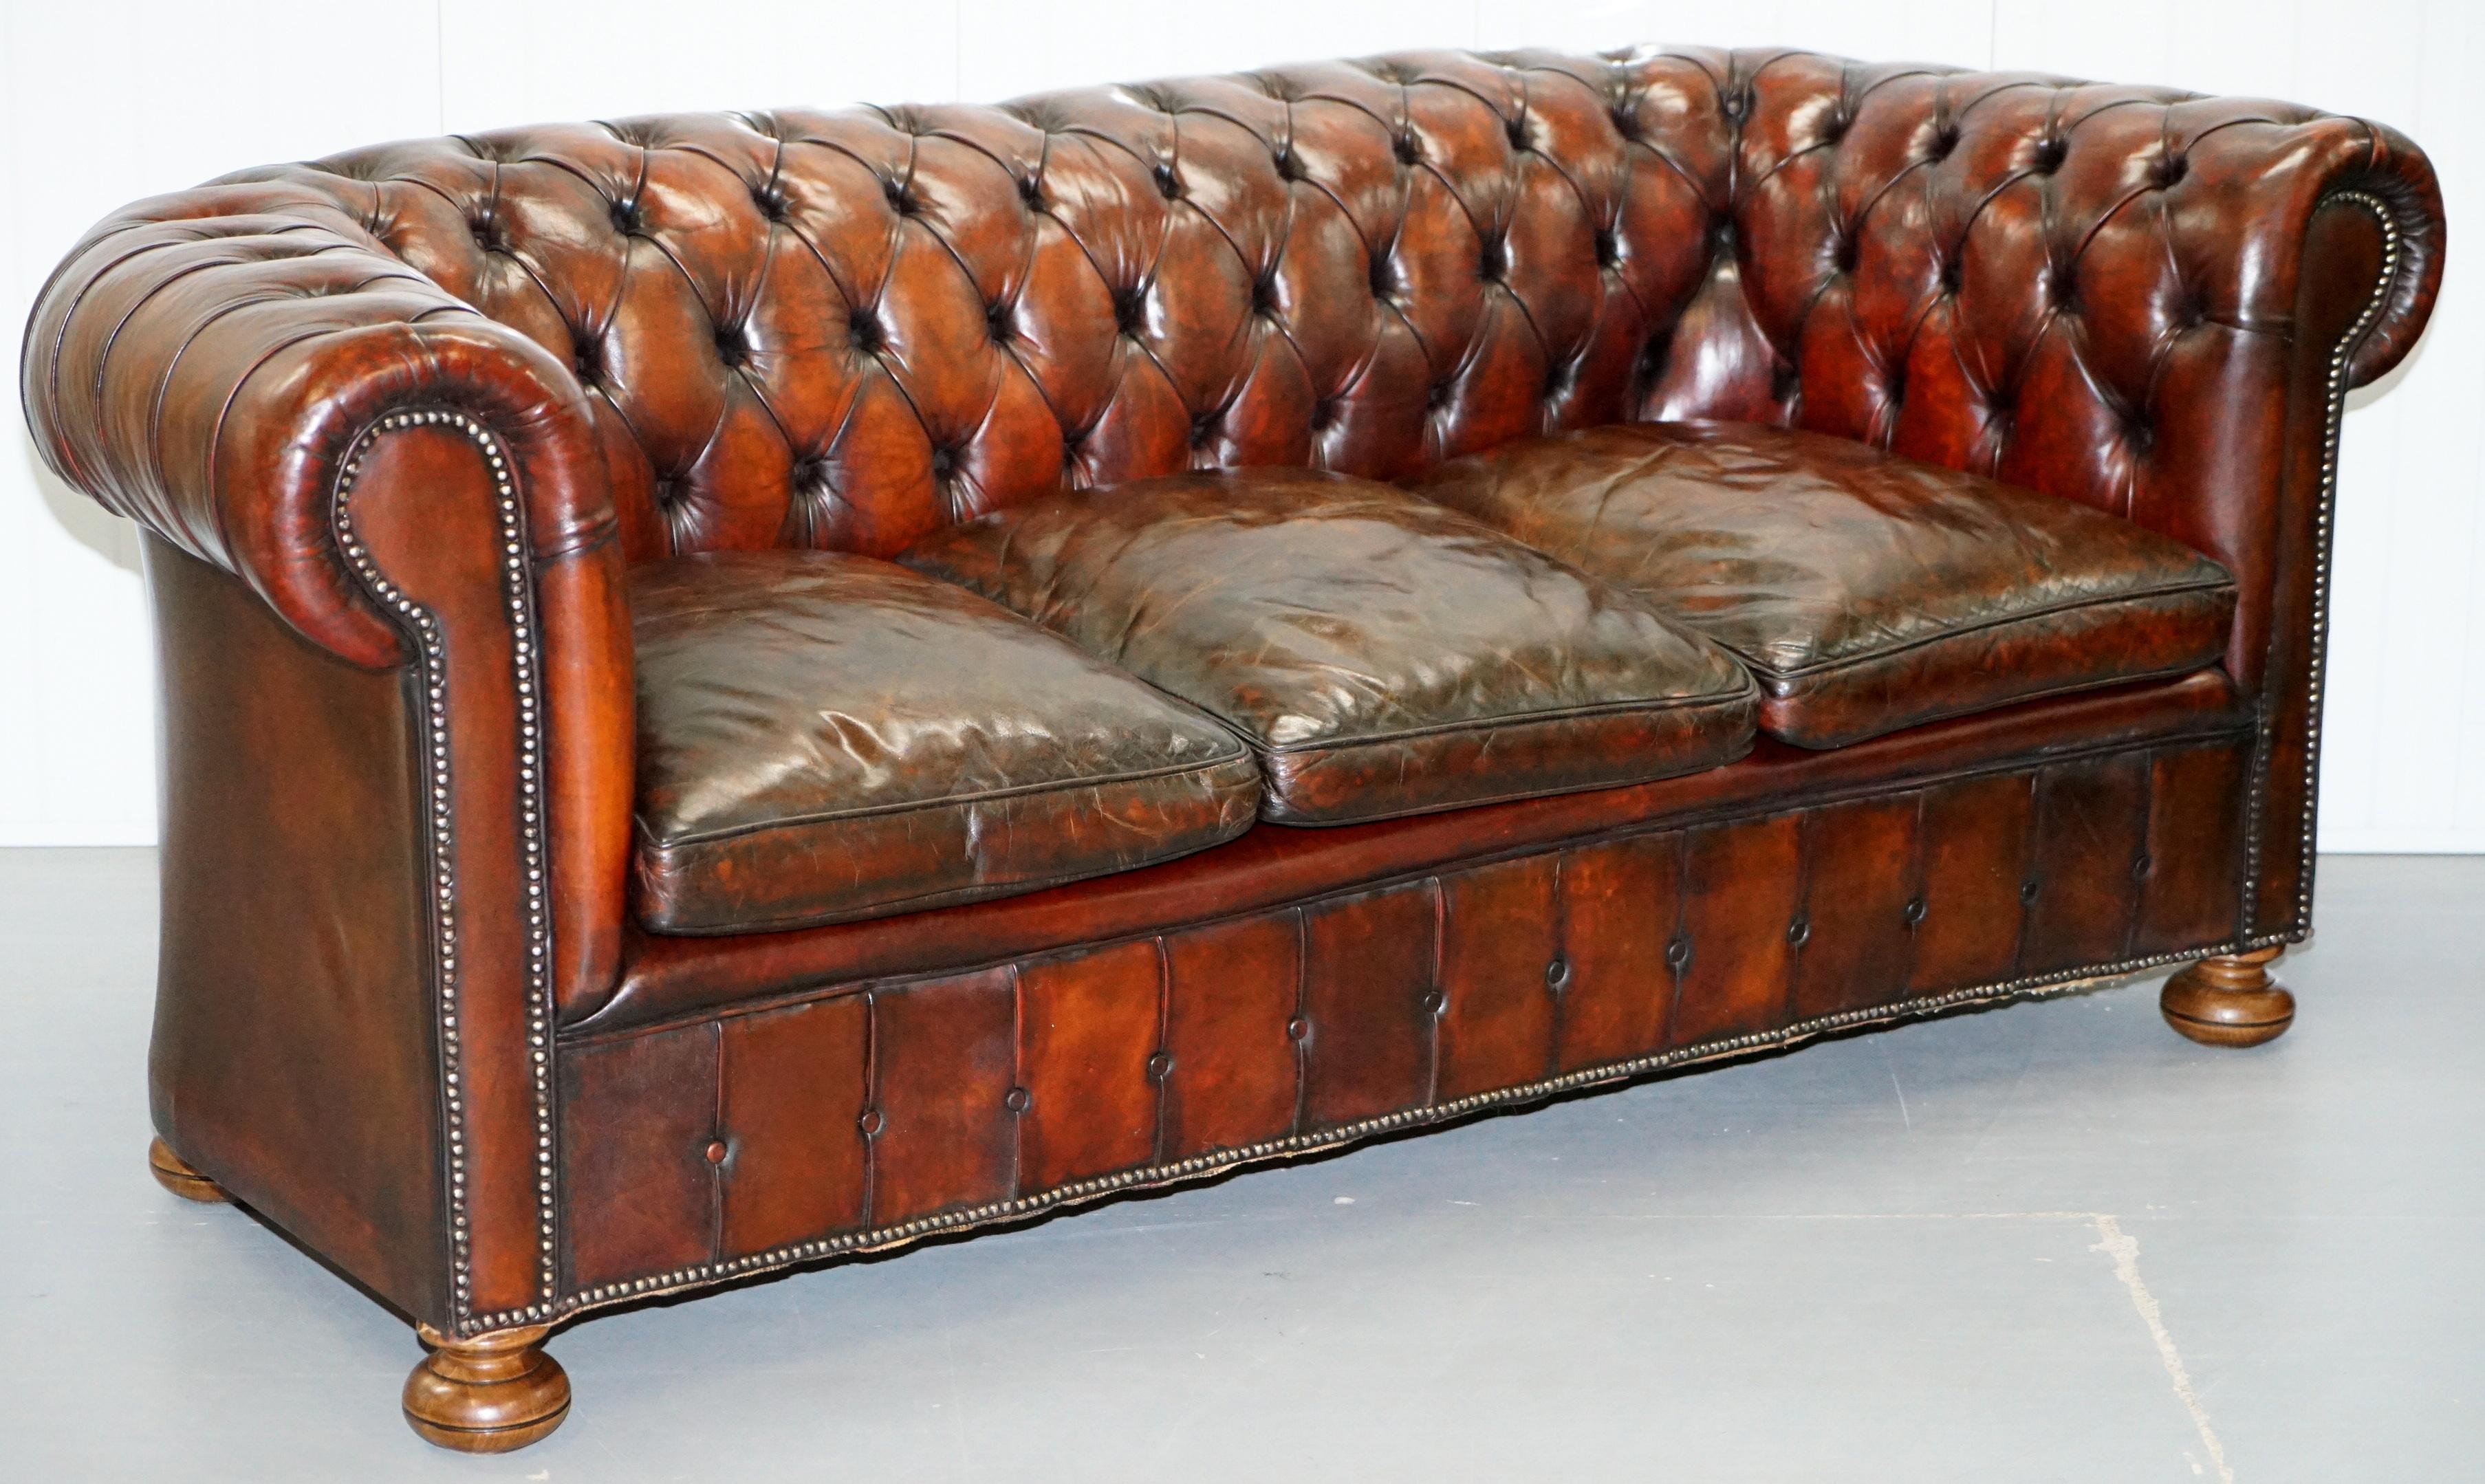 We are delighted to offer for sale this exceptionally rare original 1930s cigar brown leather Chesterfield club sofa in newly restored condition with feather filled cushions 

A really very rare find, you almost never come across early 20th